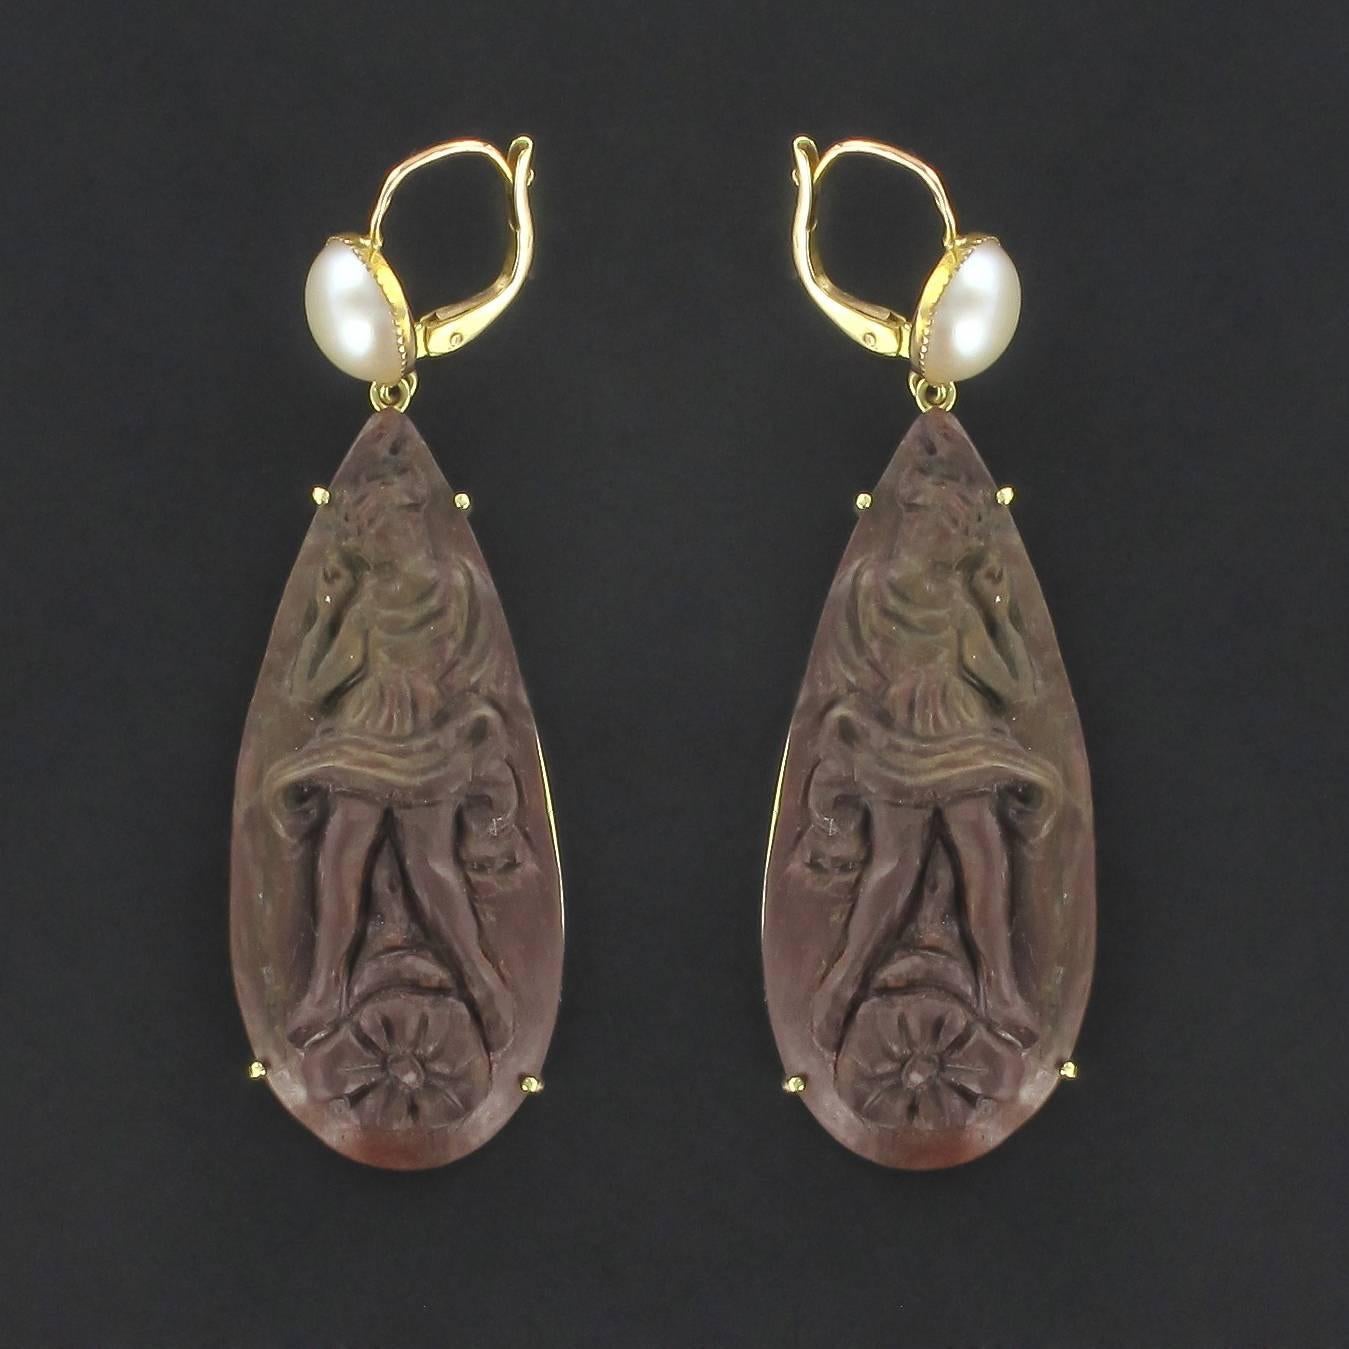 Earrings in yellow gold, 750 thousandths, 18K.

These splendid dangle earrings are each composed of a beaded sleeper setting with a half white oriental cultured pearl from which is suspended a tear shaped brown cameo in lava stone. Each cameo